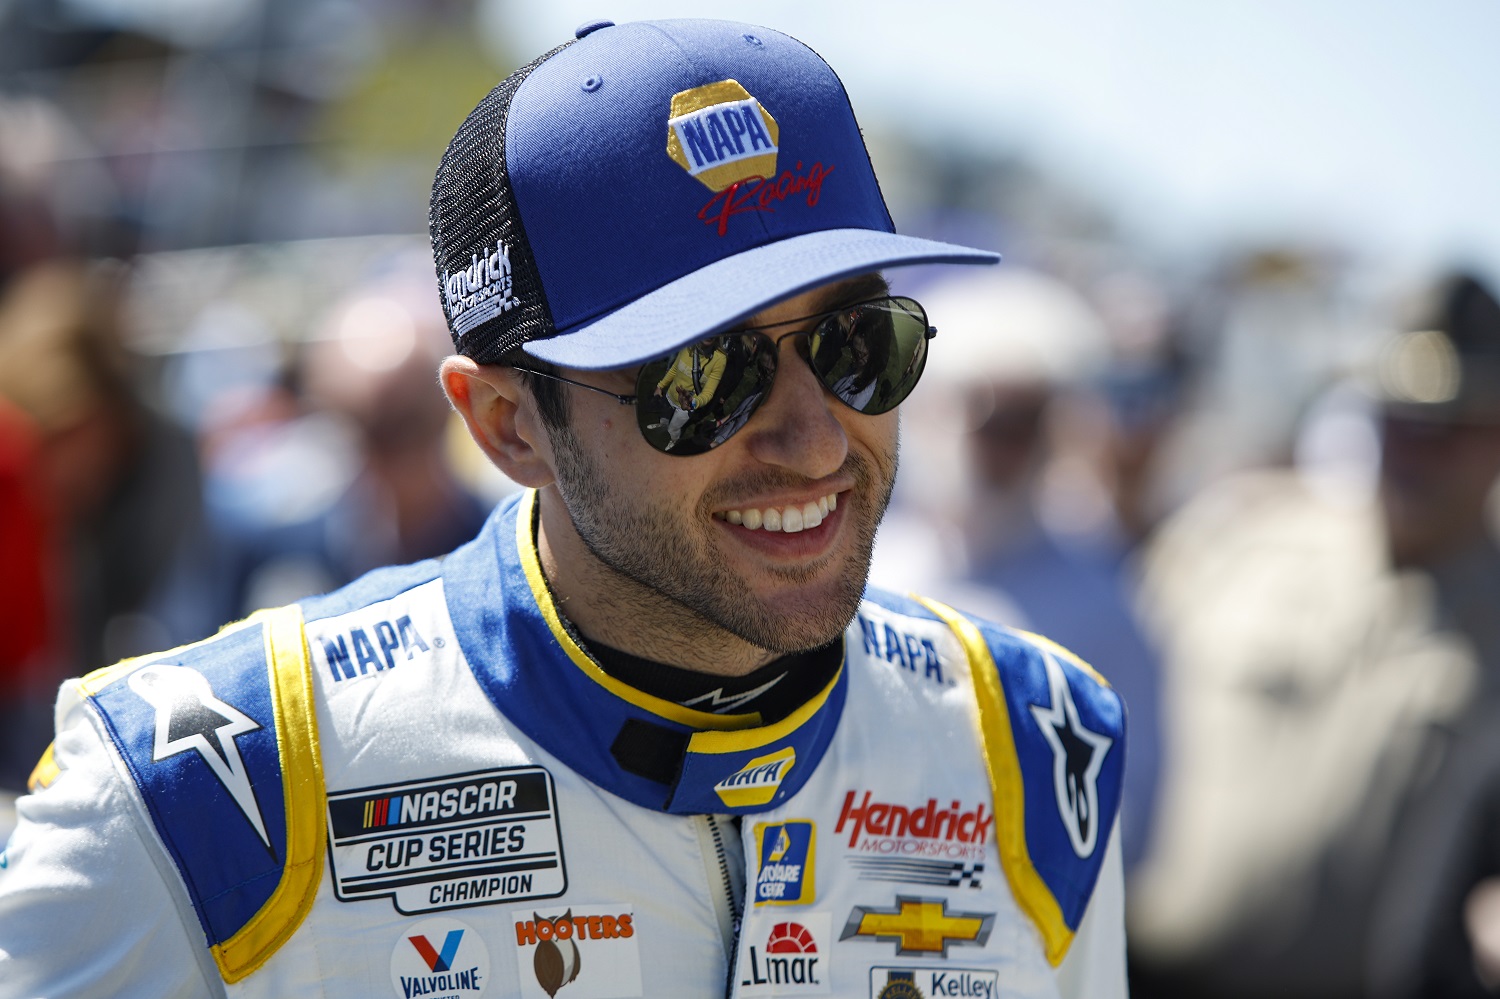 Chase Elliott waits on the grid prior to the NASCAR Cup Series Folds of Honor QuikTrip 500 at Atlanta Motor Speedway on March 20, 2022. | Sean Gardner/Getty Images